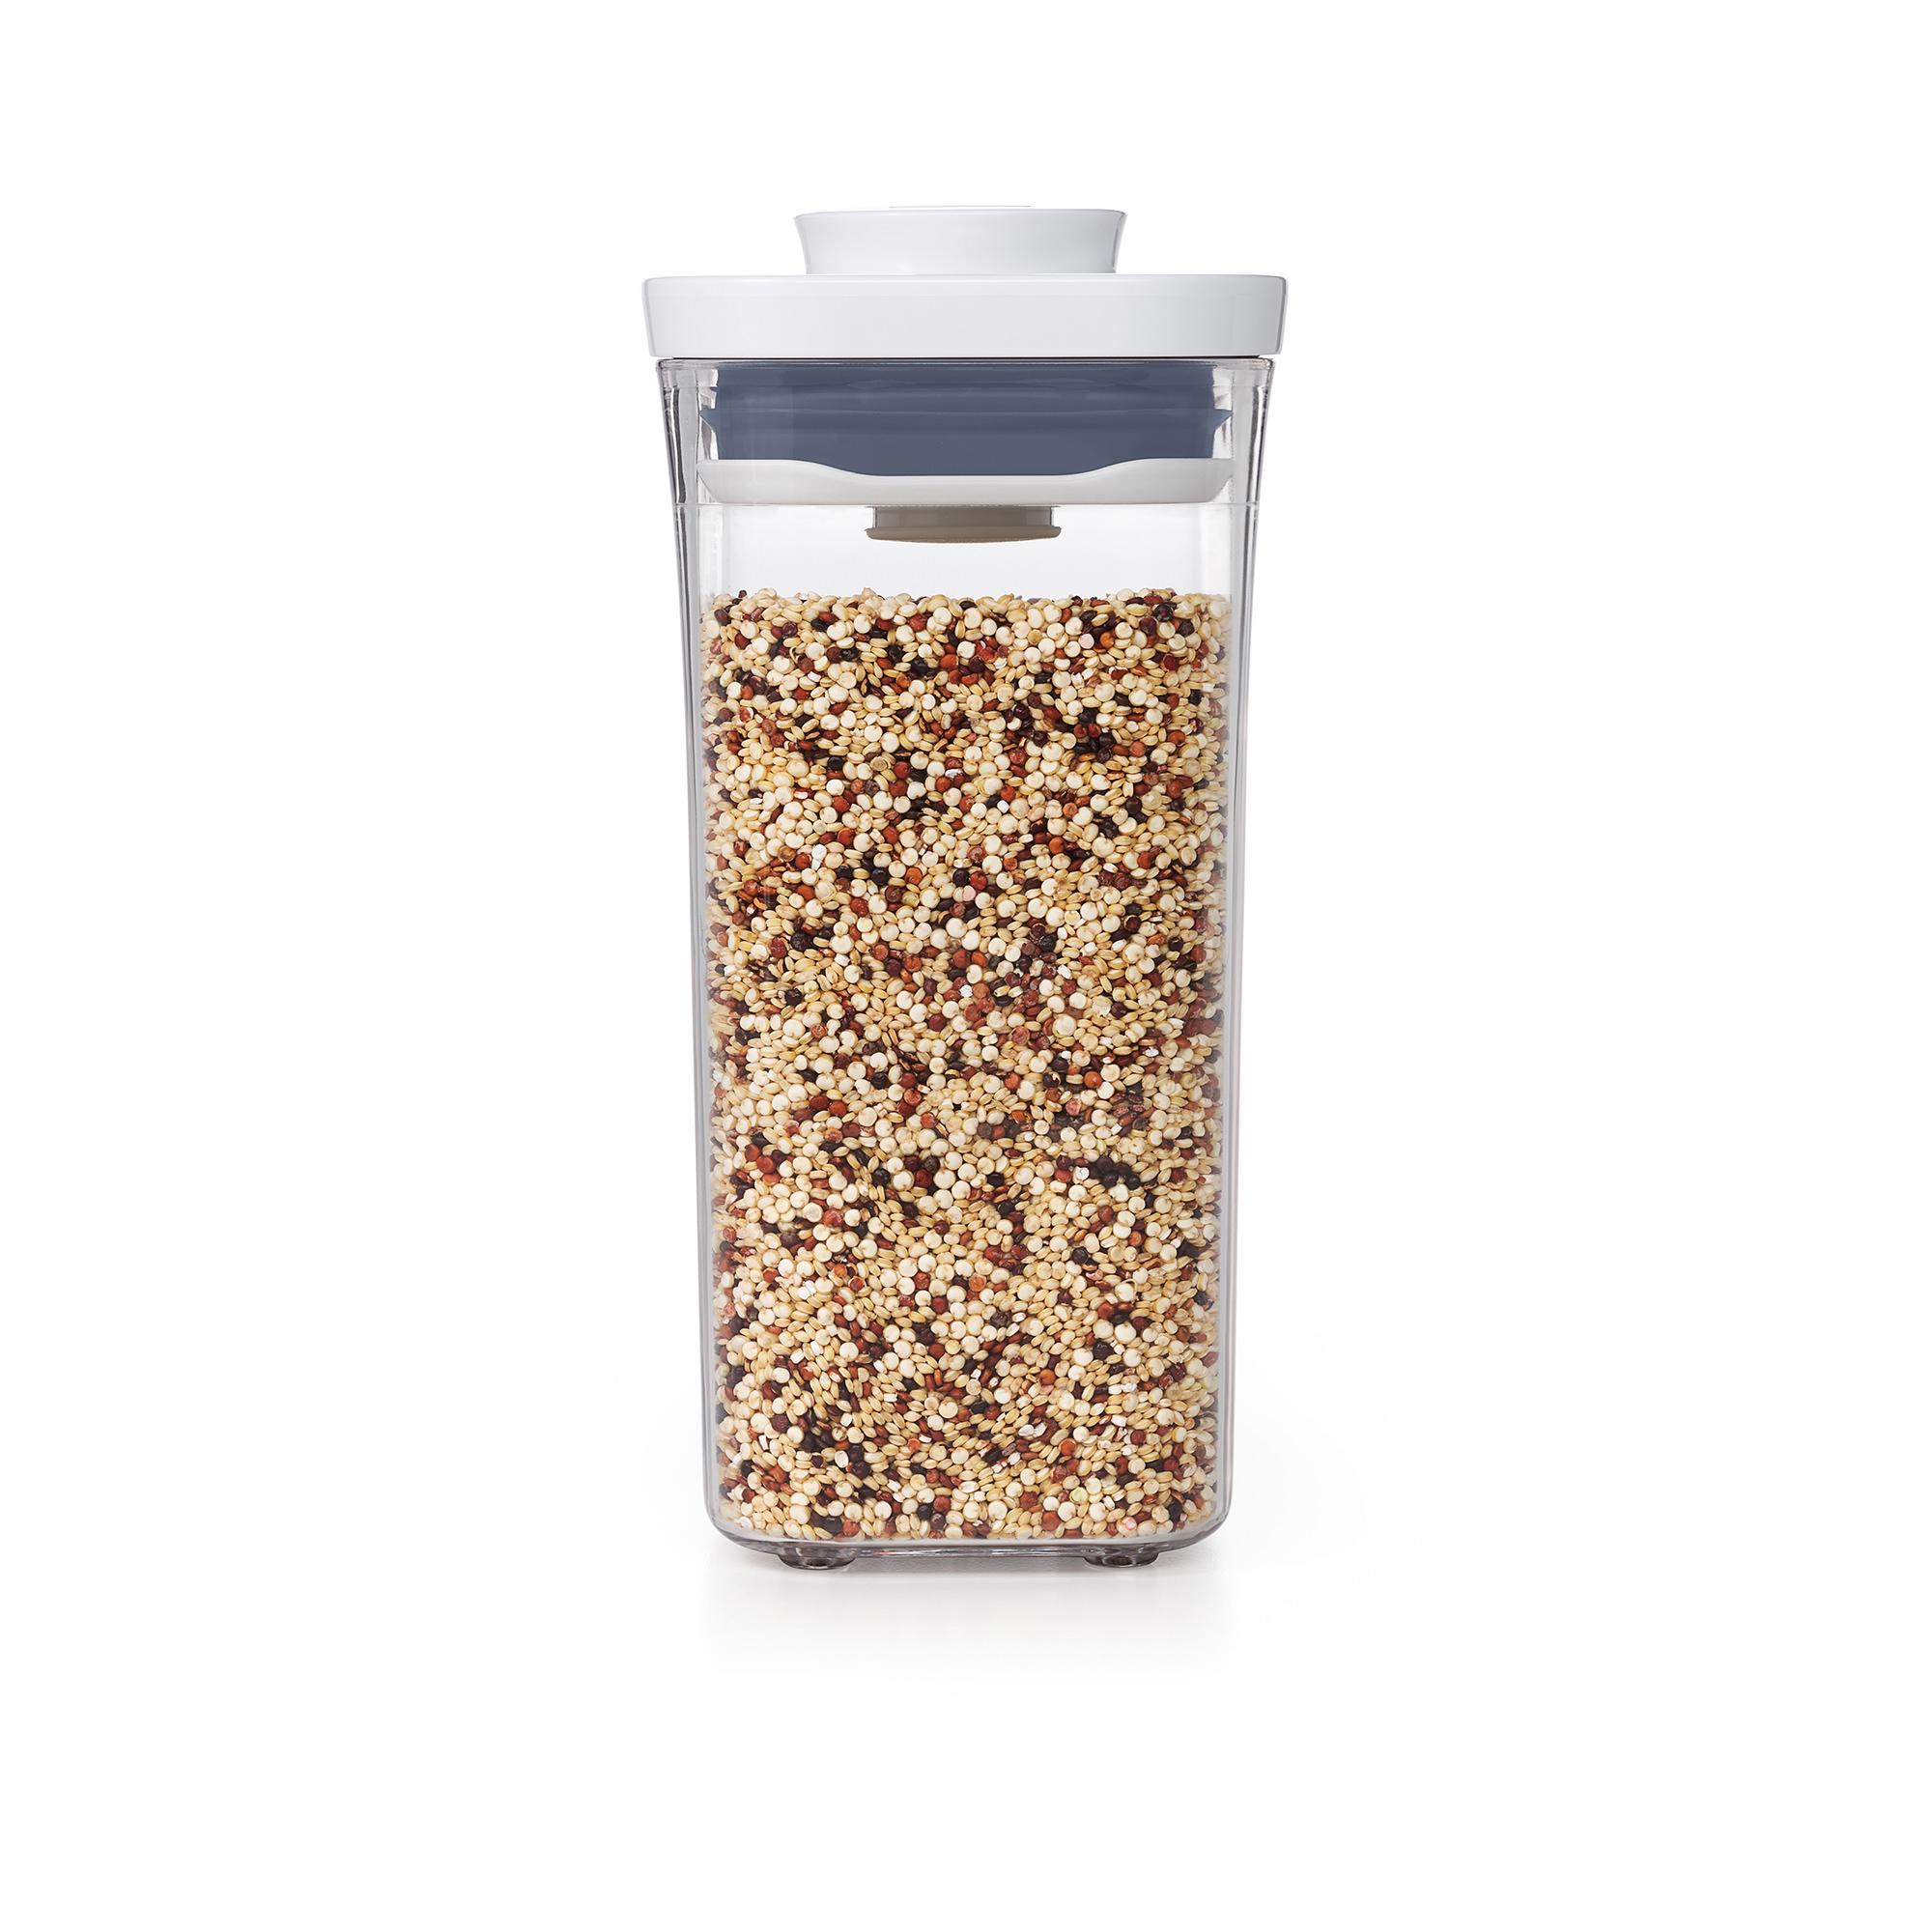 OXO Good Grips Square Pop 2.0 Container 500ml Image 4